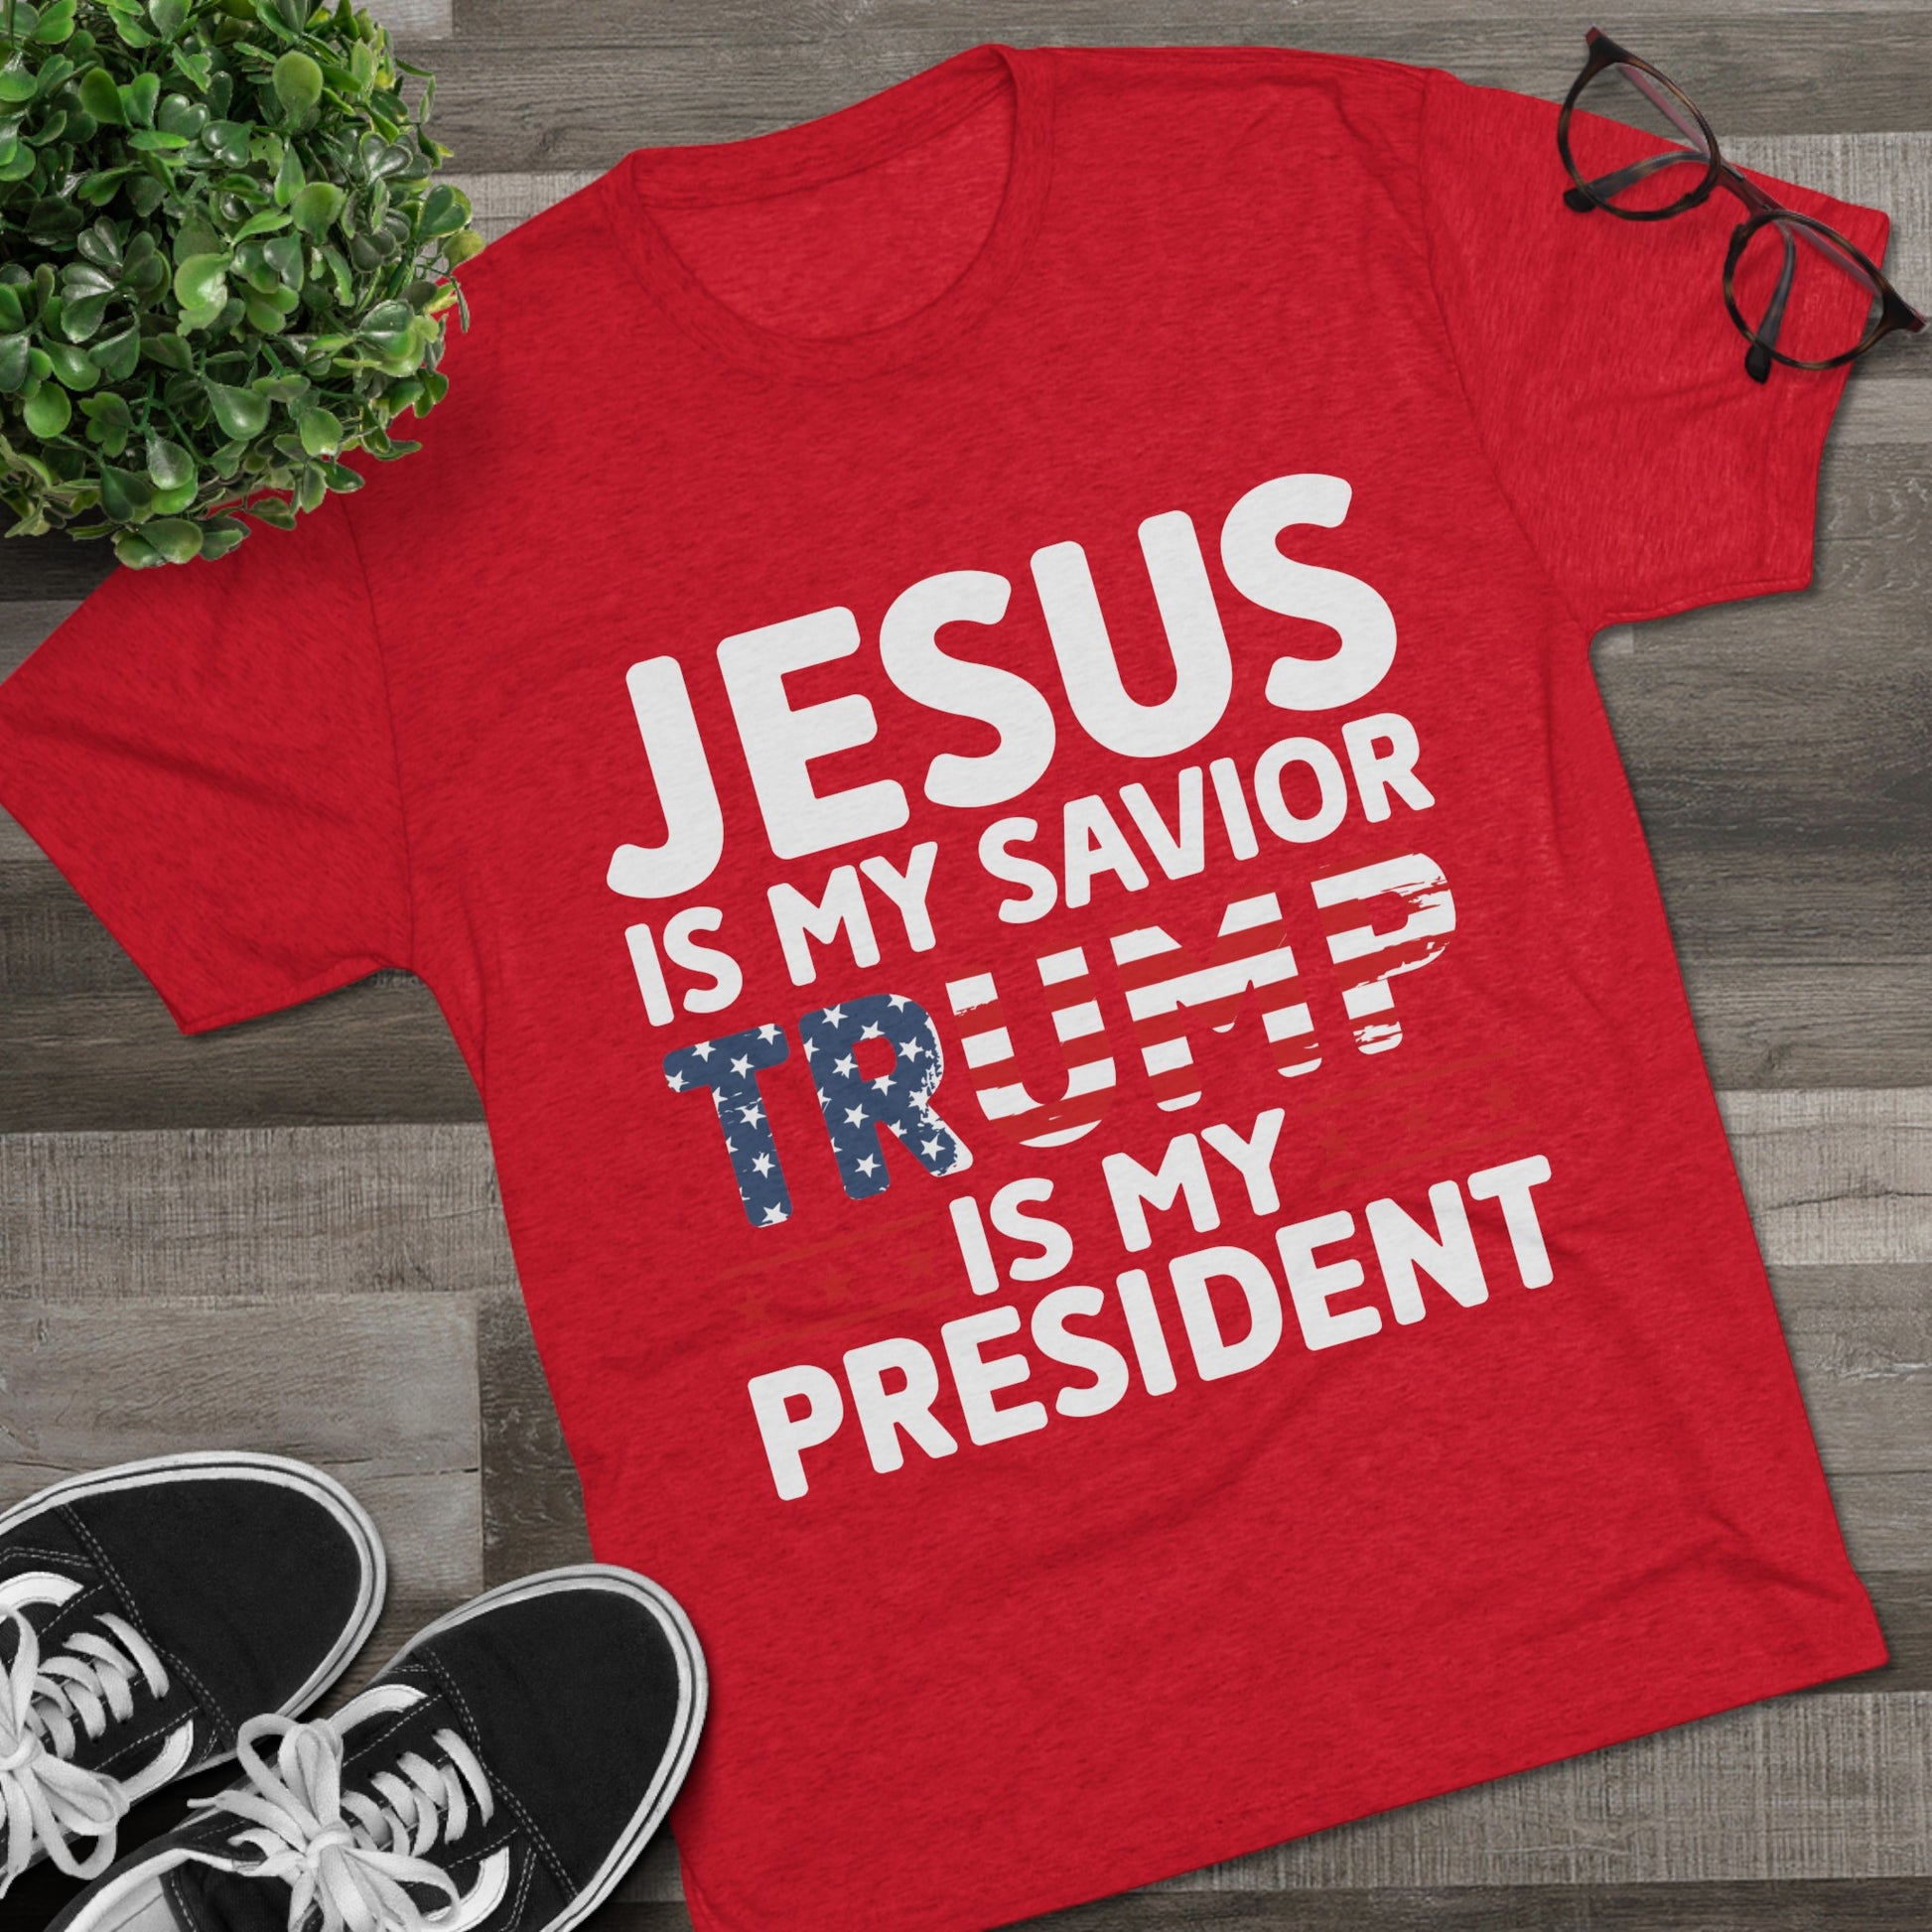 Get trendy with Jesus is My Savior, Trump is my President Unisex Tri-Blend Crew Tee - T-Shirt available at Good Gift Company. Grab yours for $21.88 today!